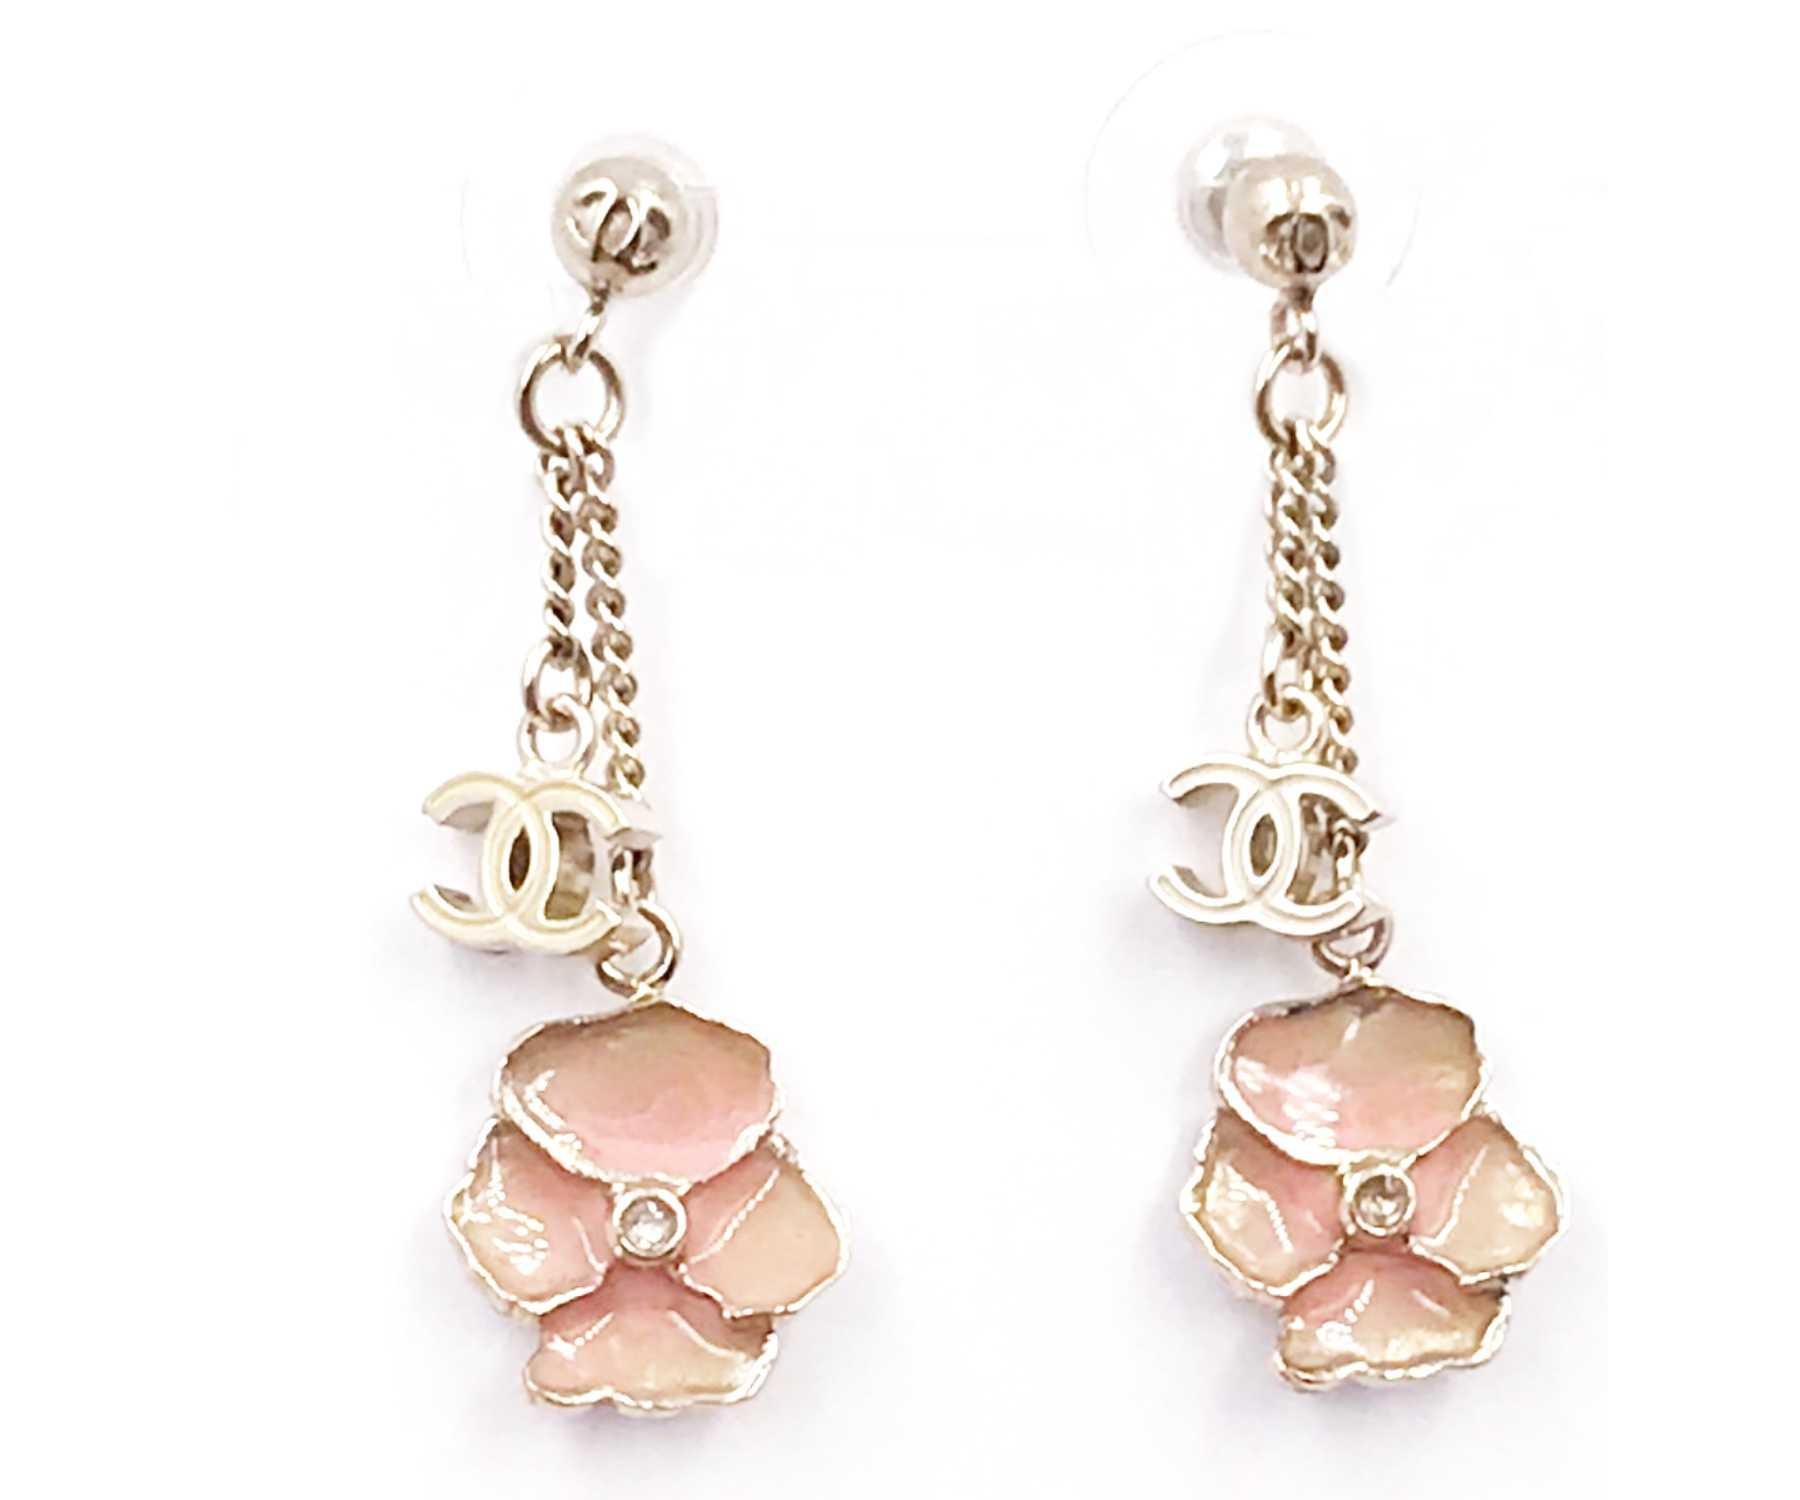 Chanel Gold CC Pink Flower Dangle Piercing Earrings

*Marked 13
*Made in Italy
*Comes with original dustbag

-It is approximately 1.6